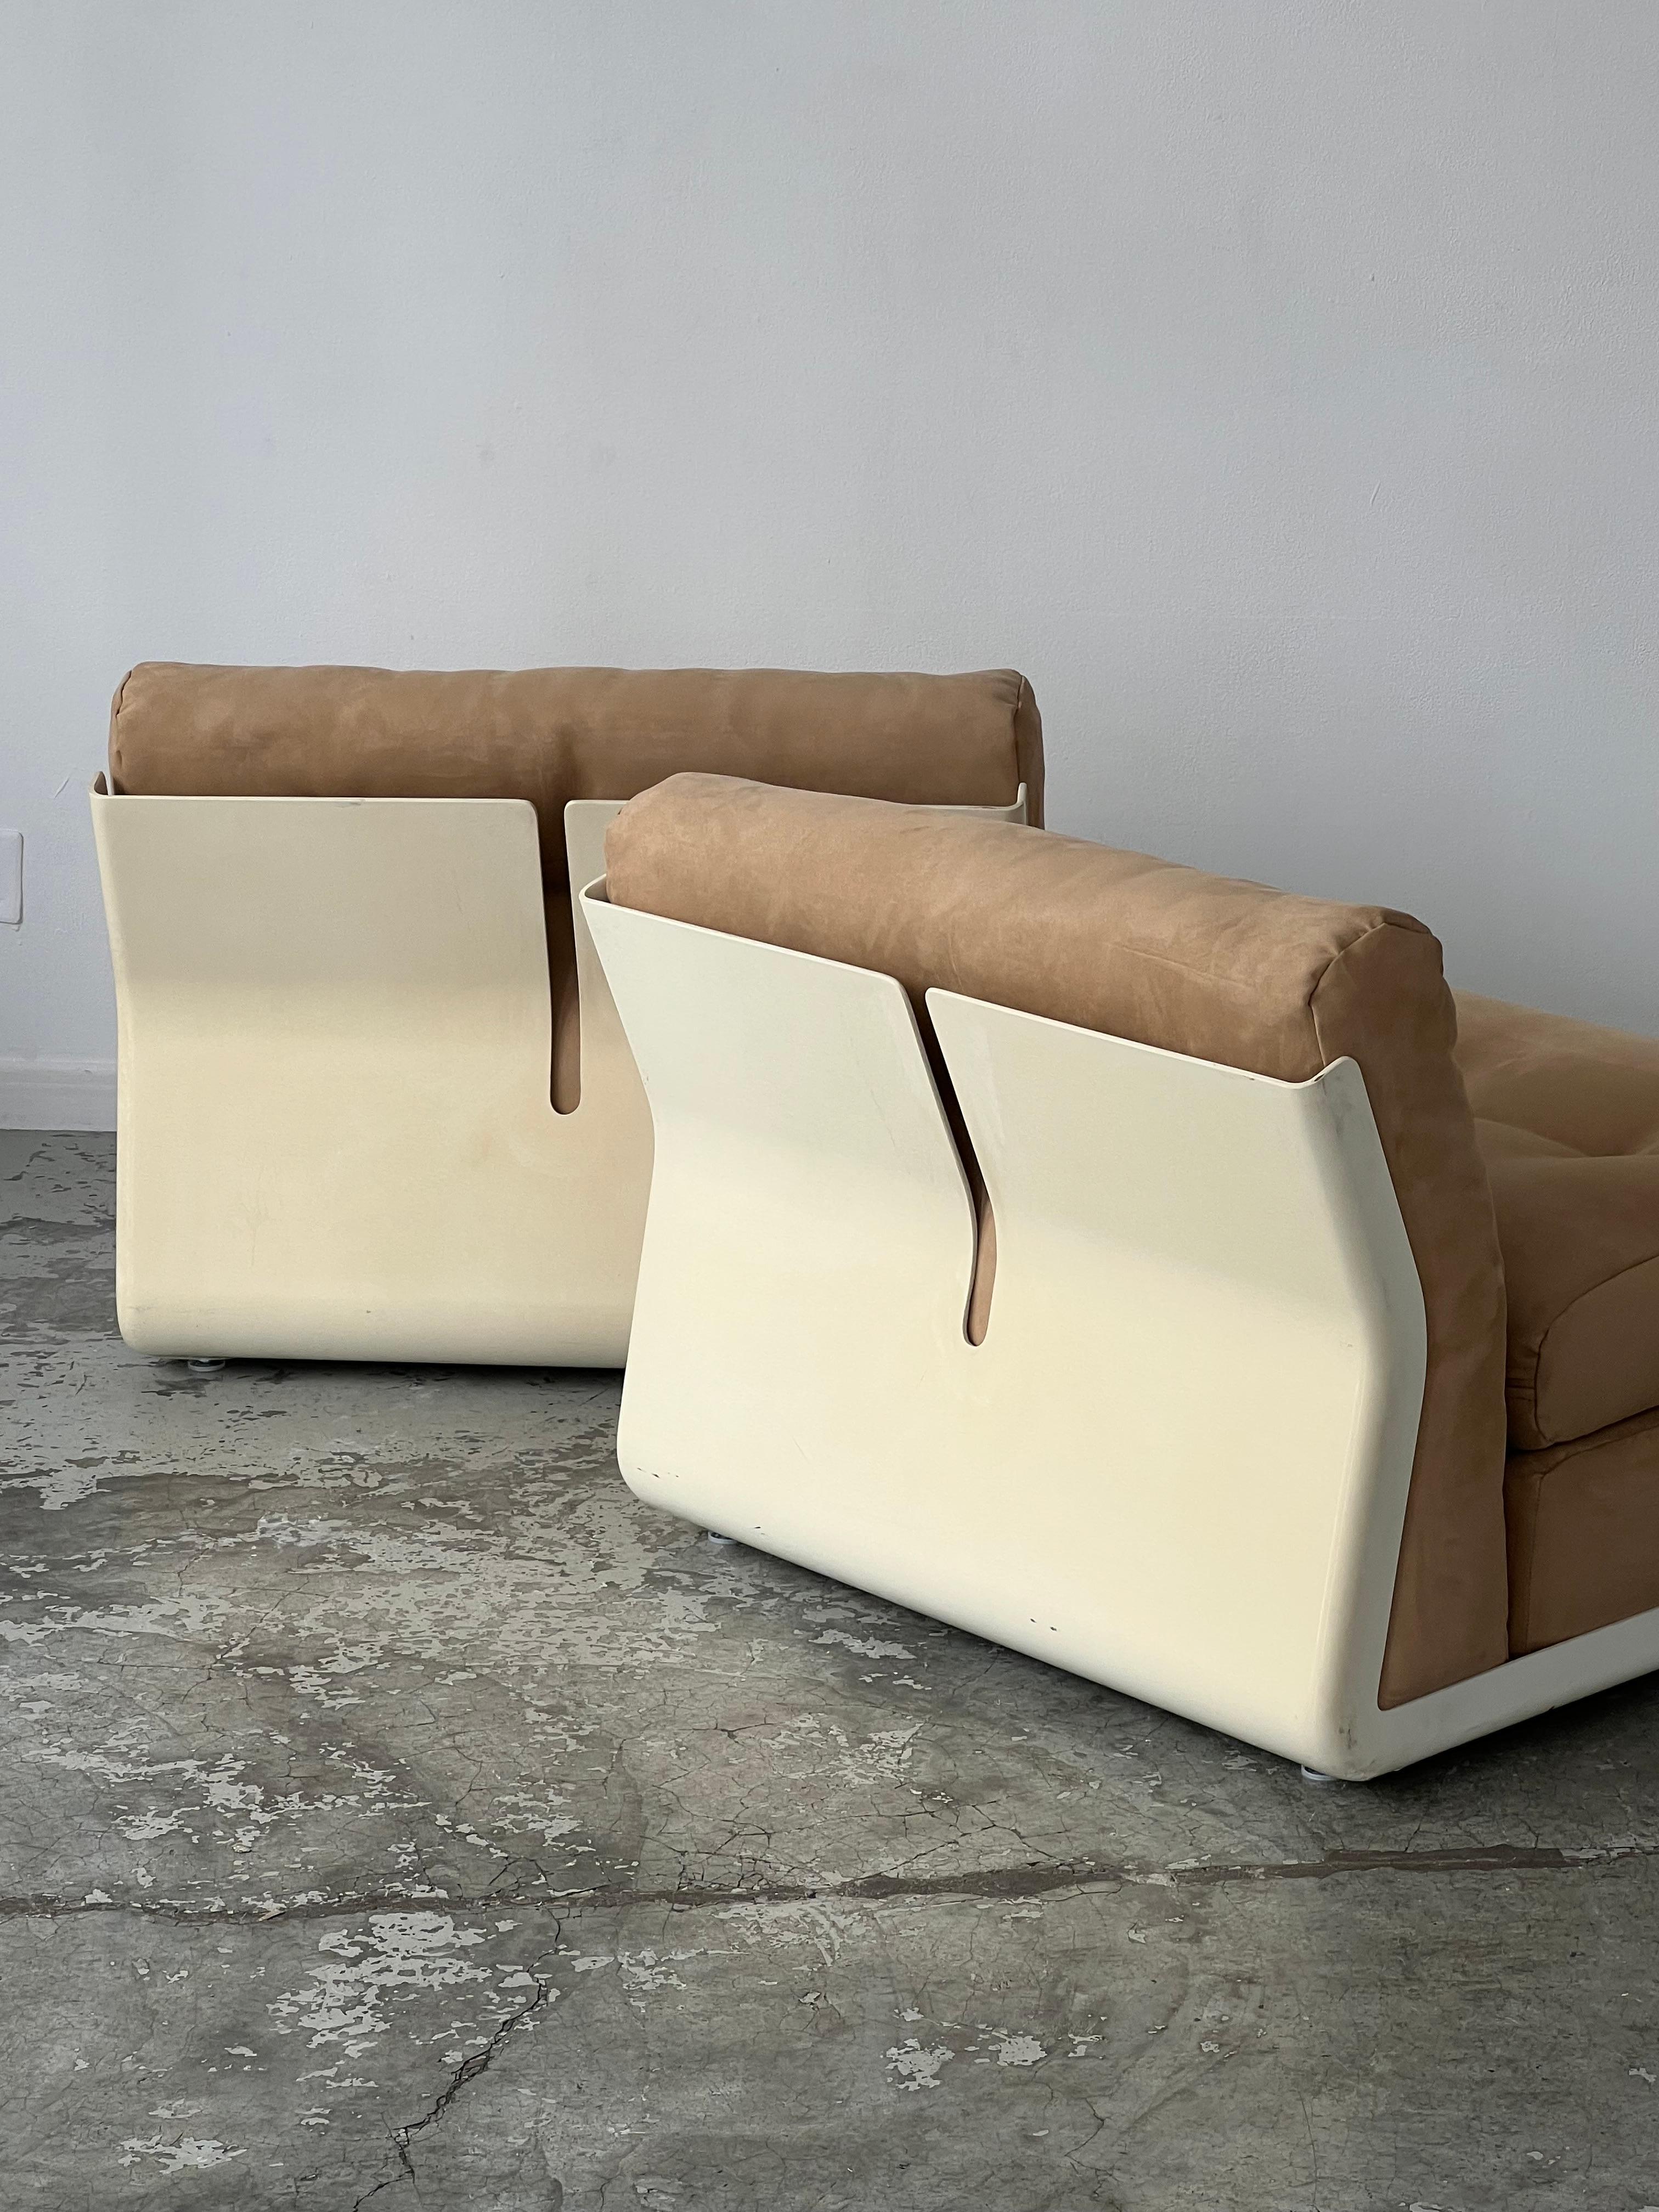 Fabric Pair of Amanta armchairs by Mario Bellini for C&b Italia 1960s For Sale